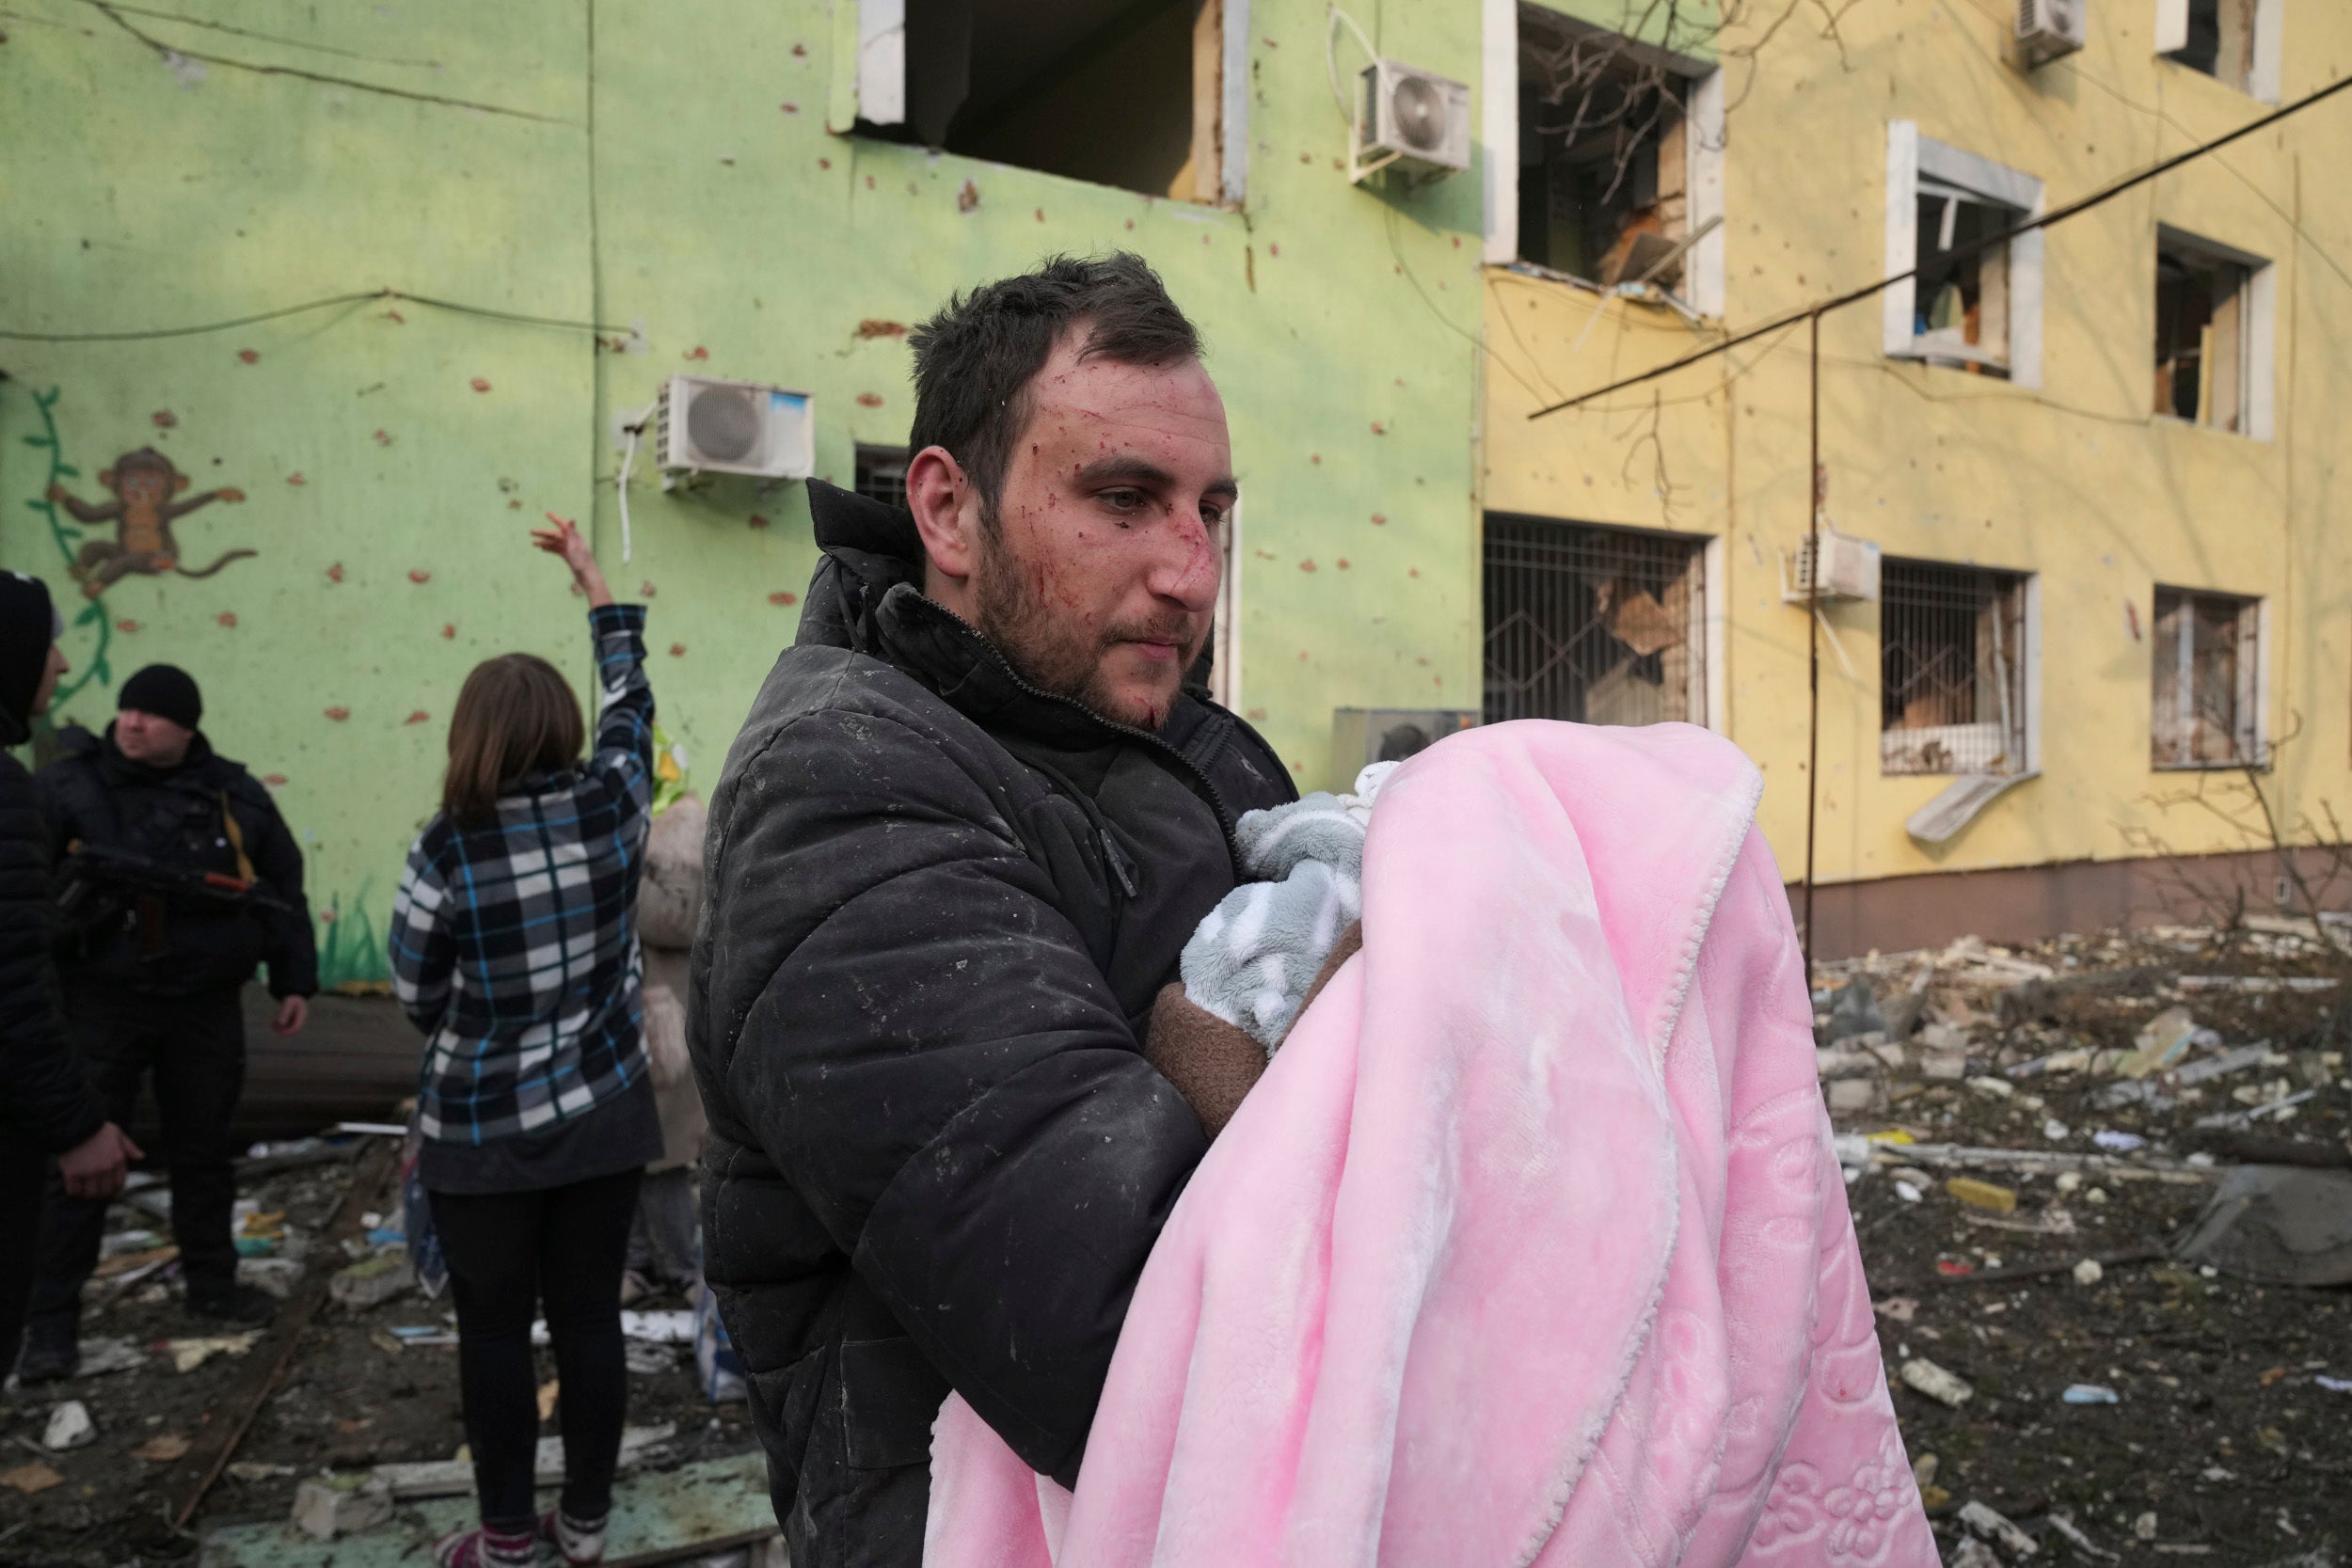 A man holds a baby during an evacuation from a maternity hospital struck in a shelling attack in Mariupol